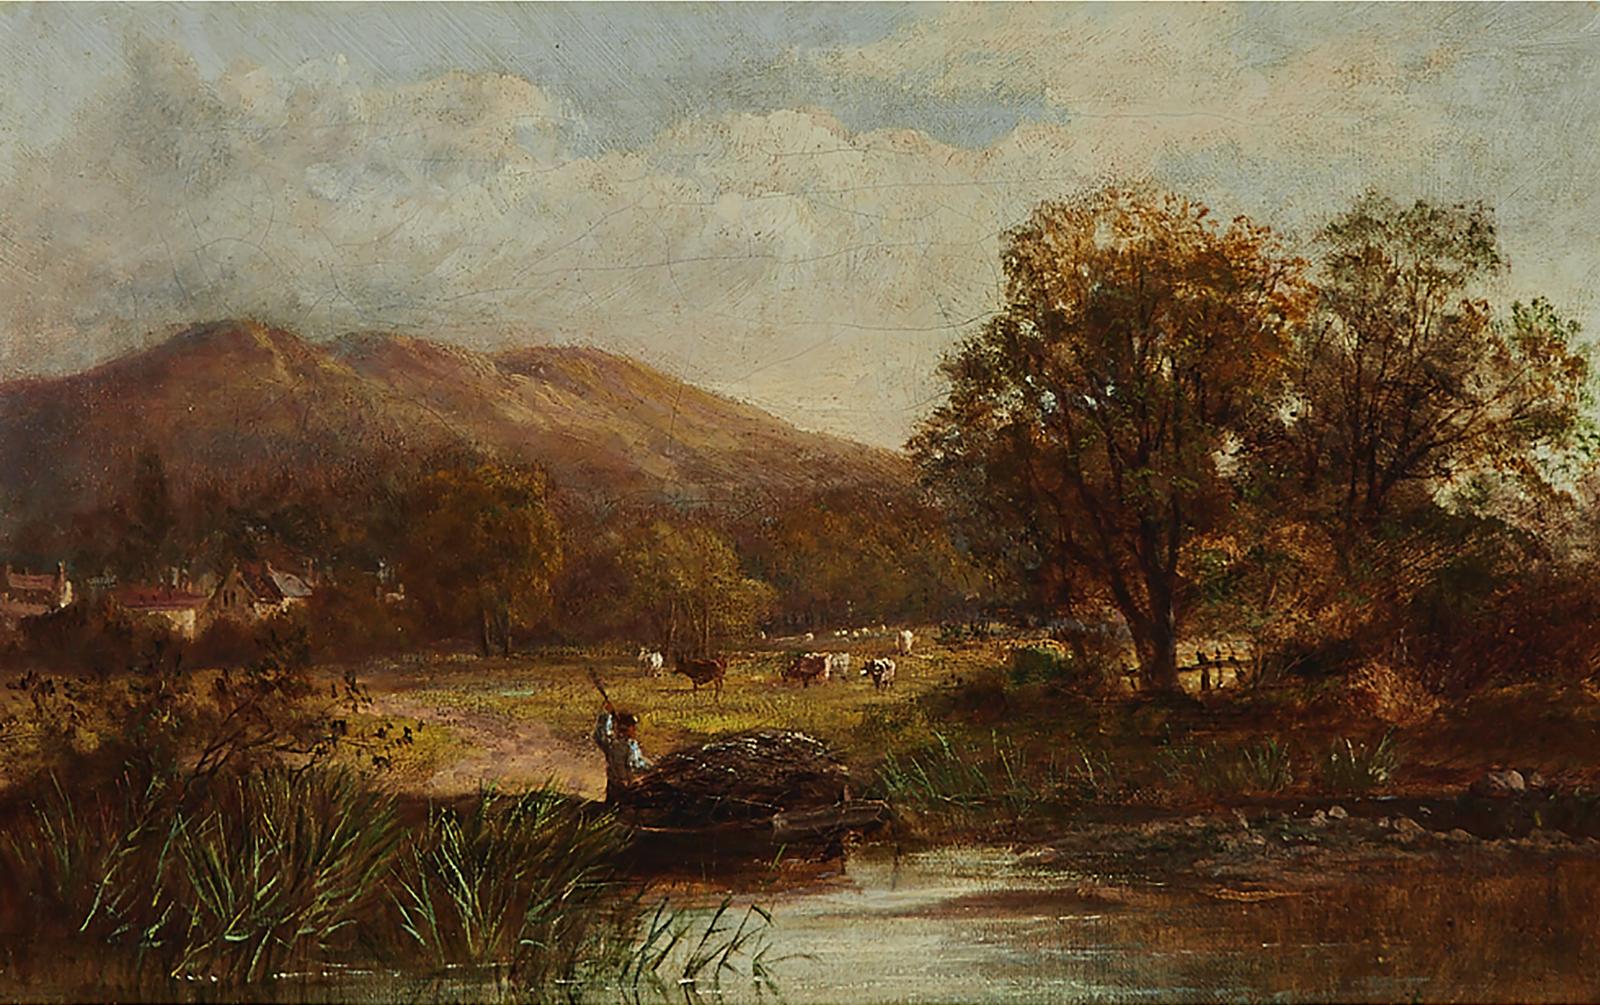 Thomas Worthington Whittredge (1820-1910) - Hudson River Landscape With Boatman And Cows In Pasture